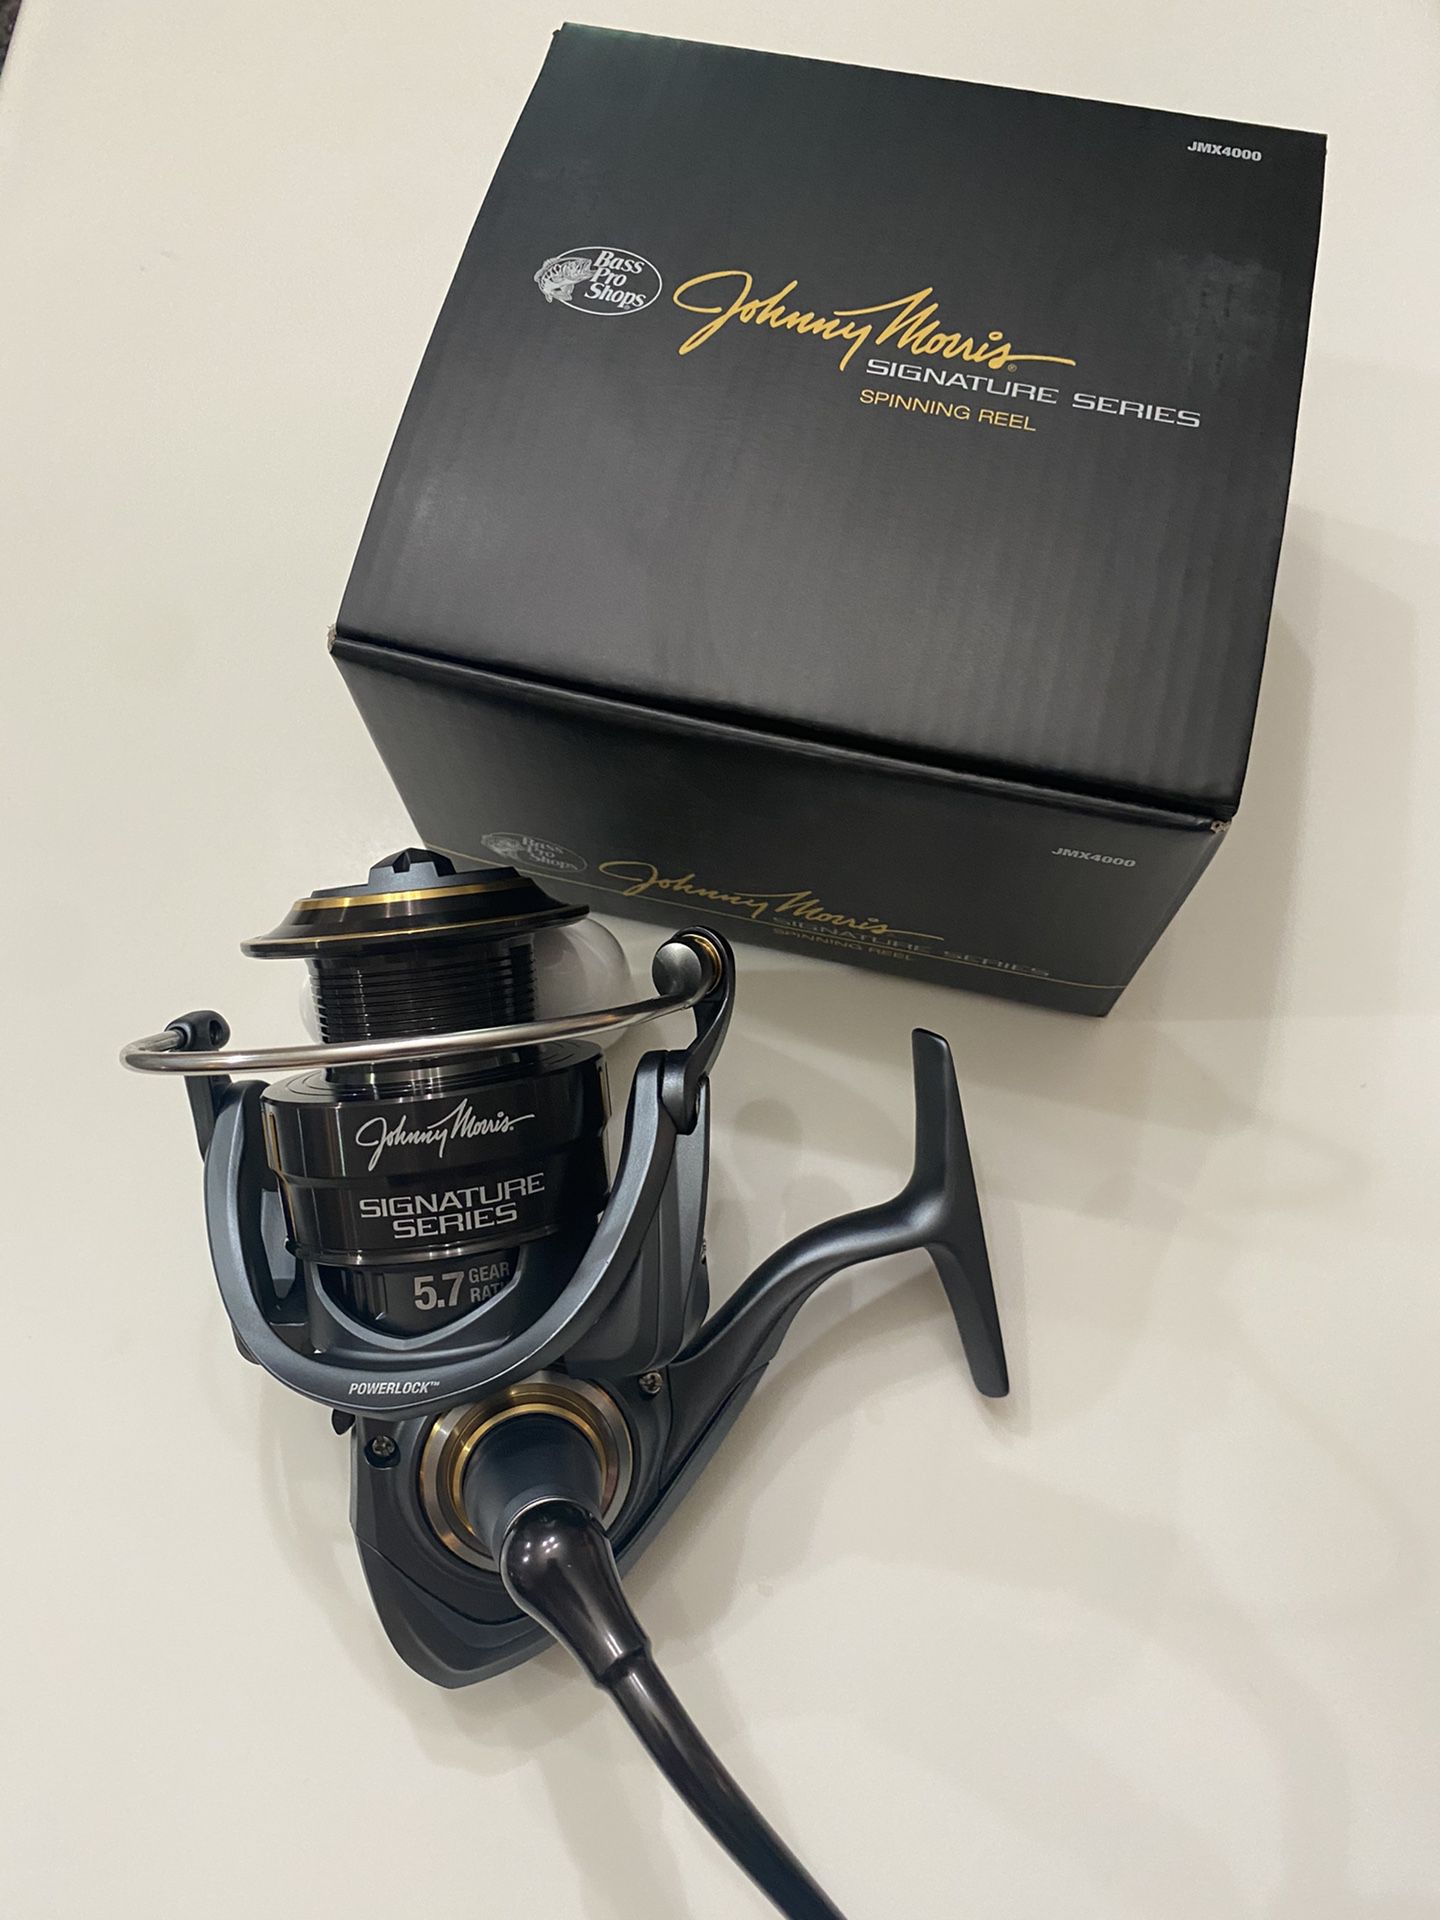 NEW Bass Pro Shops Johnny Morris Signature Series Spinning Fishing Reel 